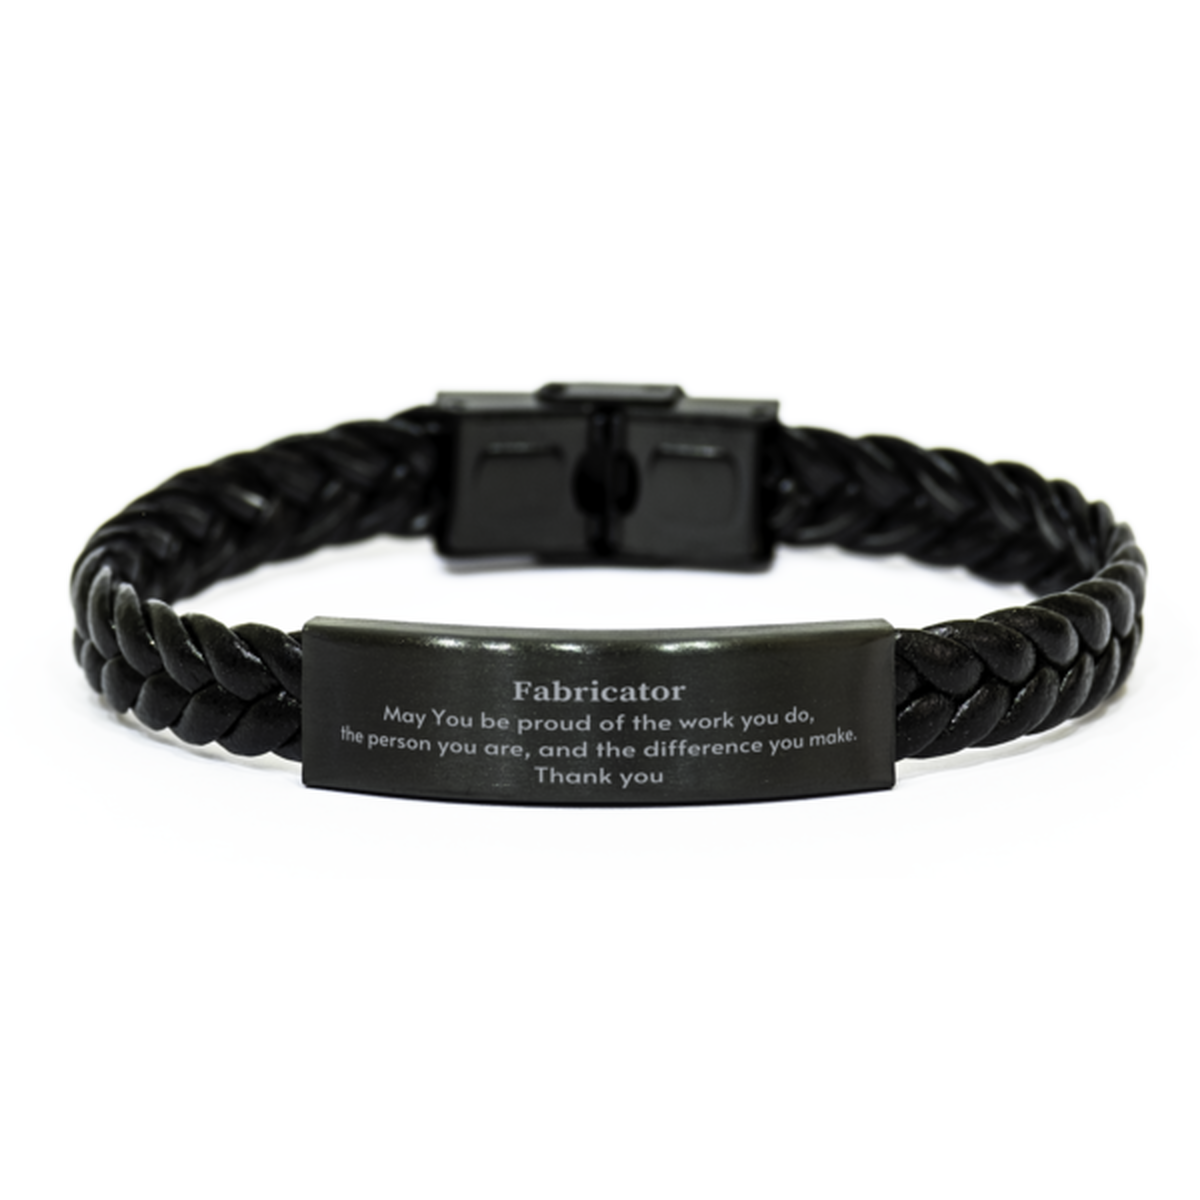 Heartwarming Braided Leather Bracelet Retirement Coworkers Gifts for Fabricator, Fabricator May You be proud of the work you do, the person you are Gifts for Boss Men Women Friends